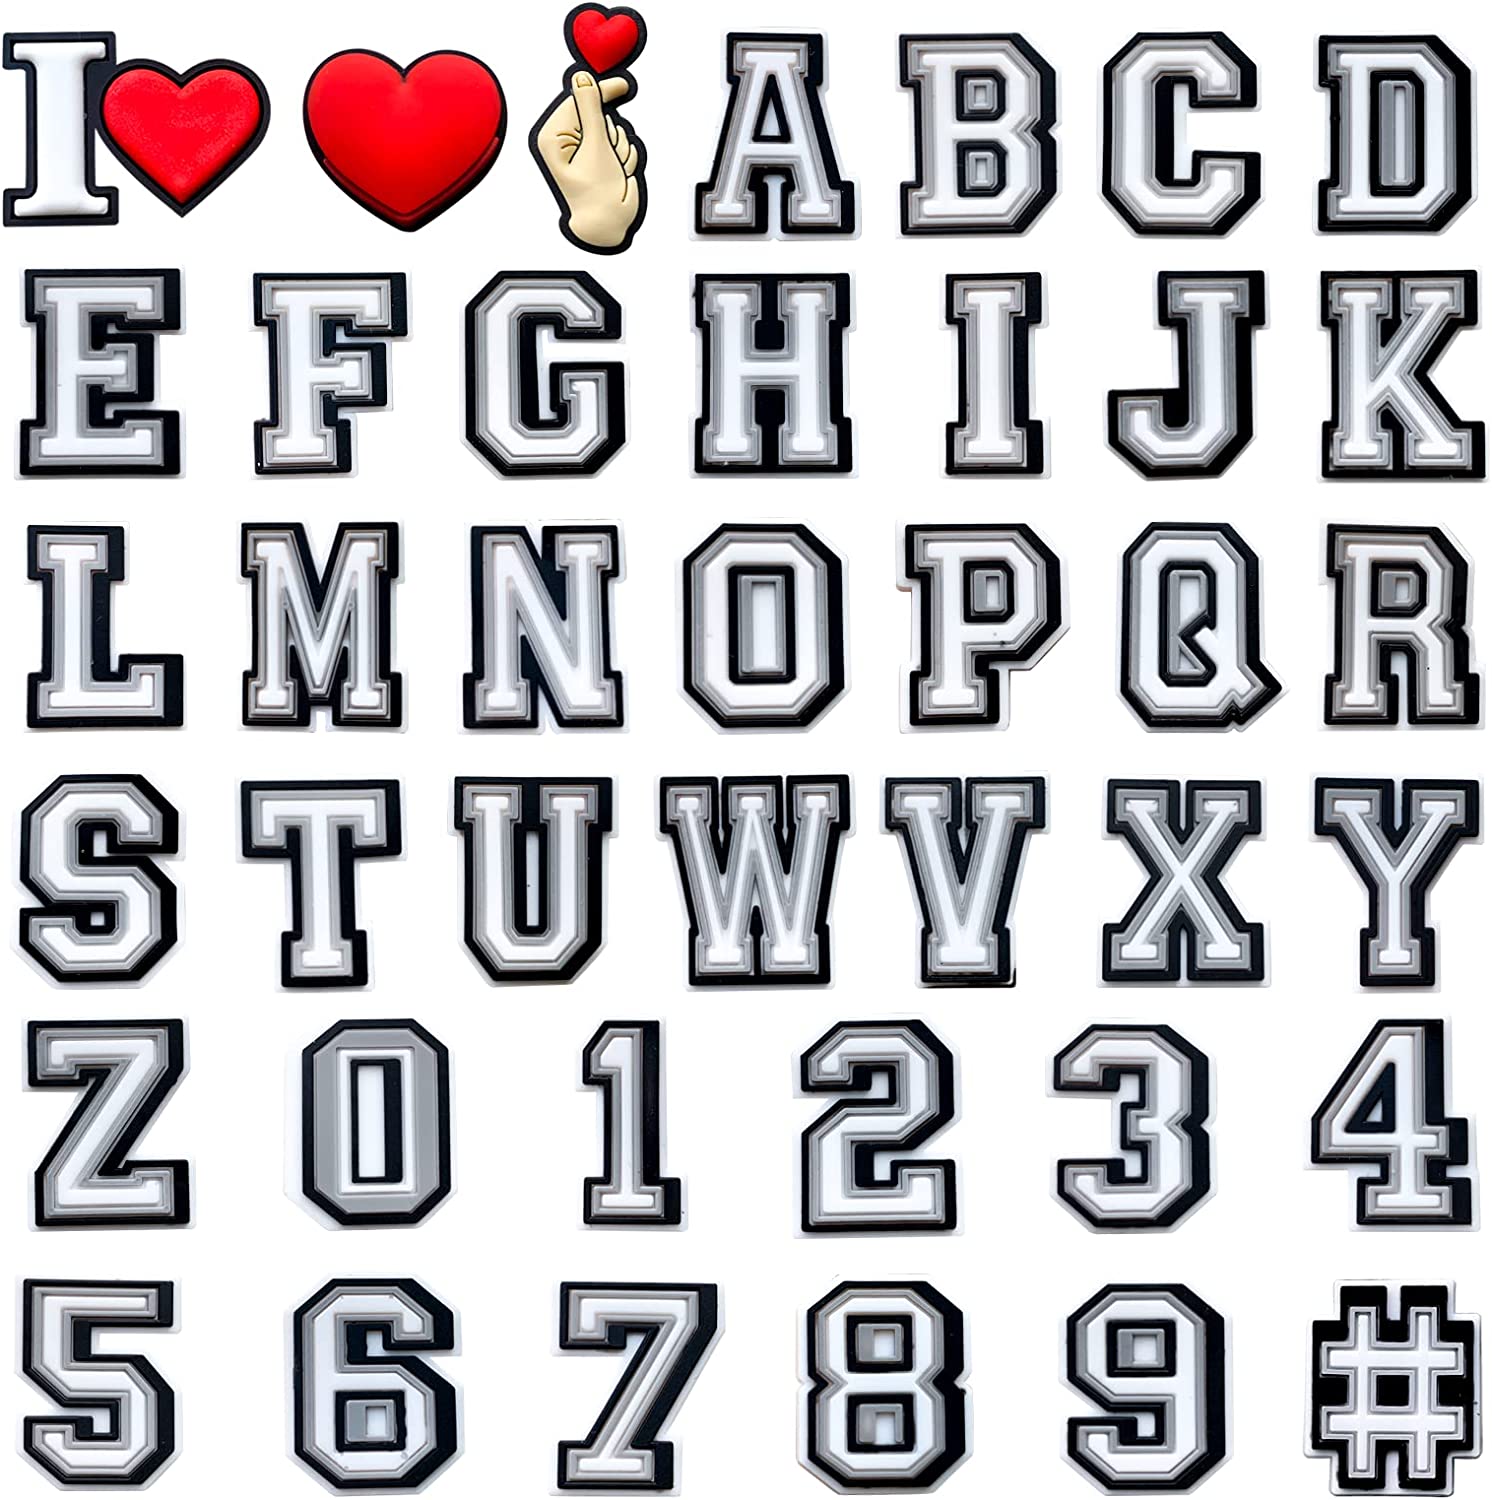 56PCS Double Letter Shoe Charms for Crocs, Alphabet Gibits Charms with 'I  Heart' and Hashtag Symbols for Sandals Decorations, Letter Croc Charms Pack